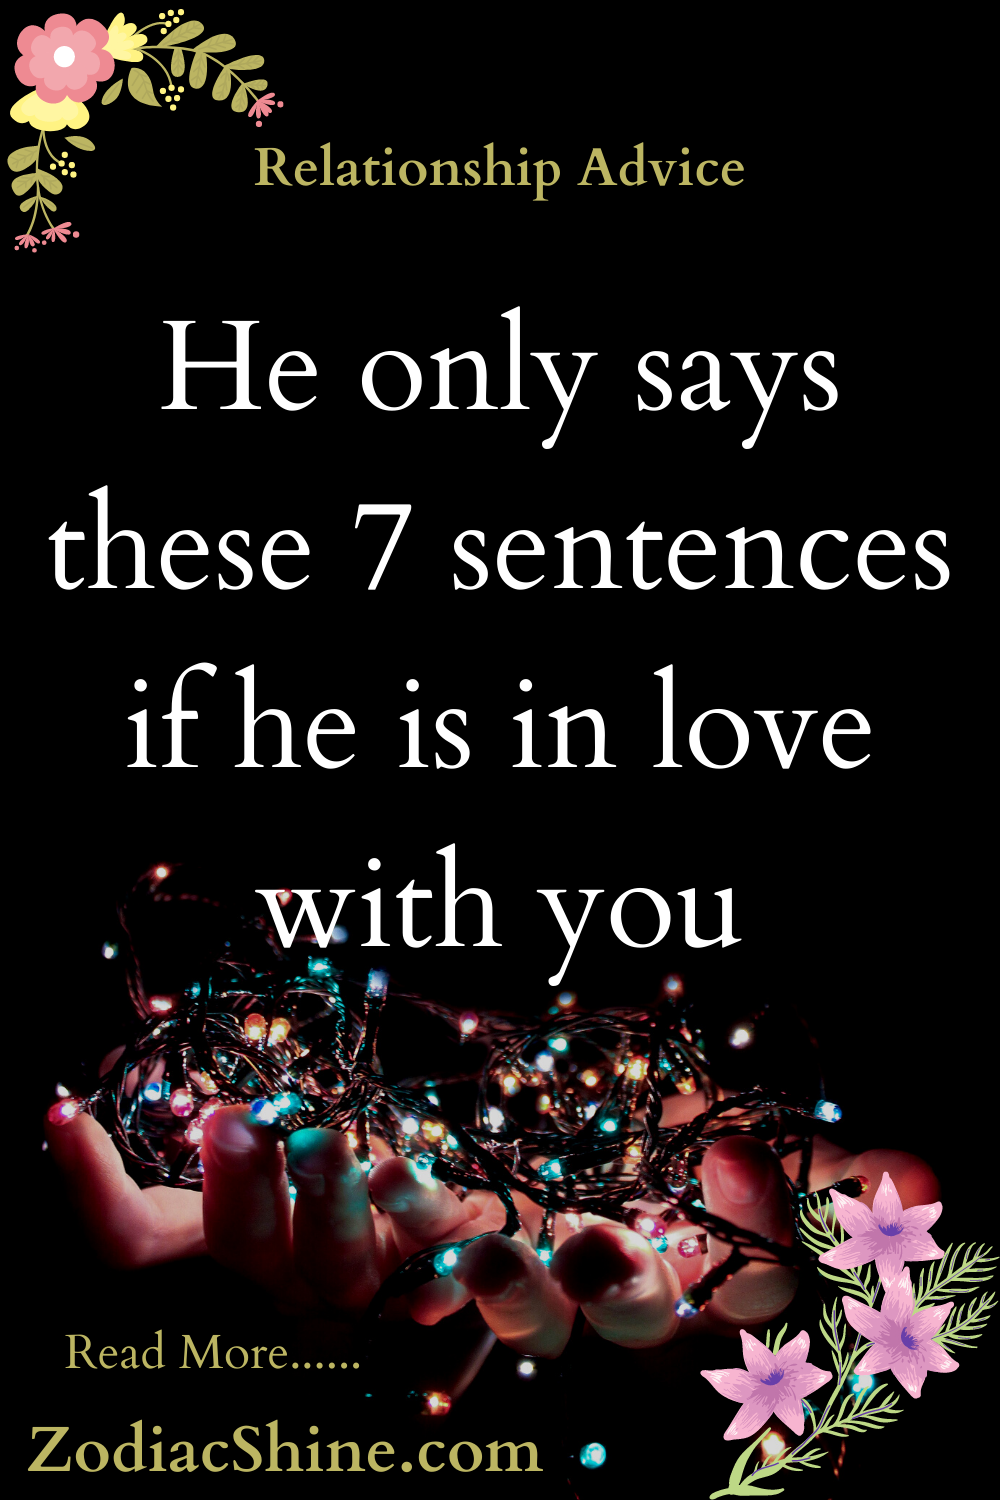 He only says these 7 sentences if he is in love with you